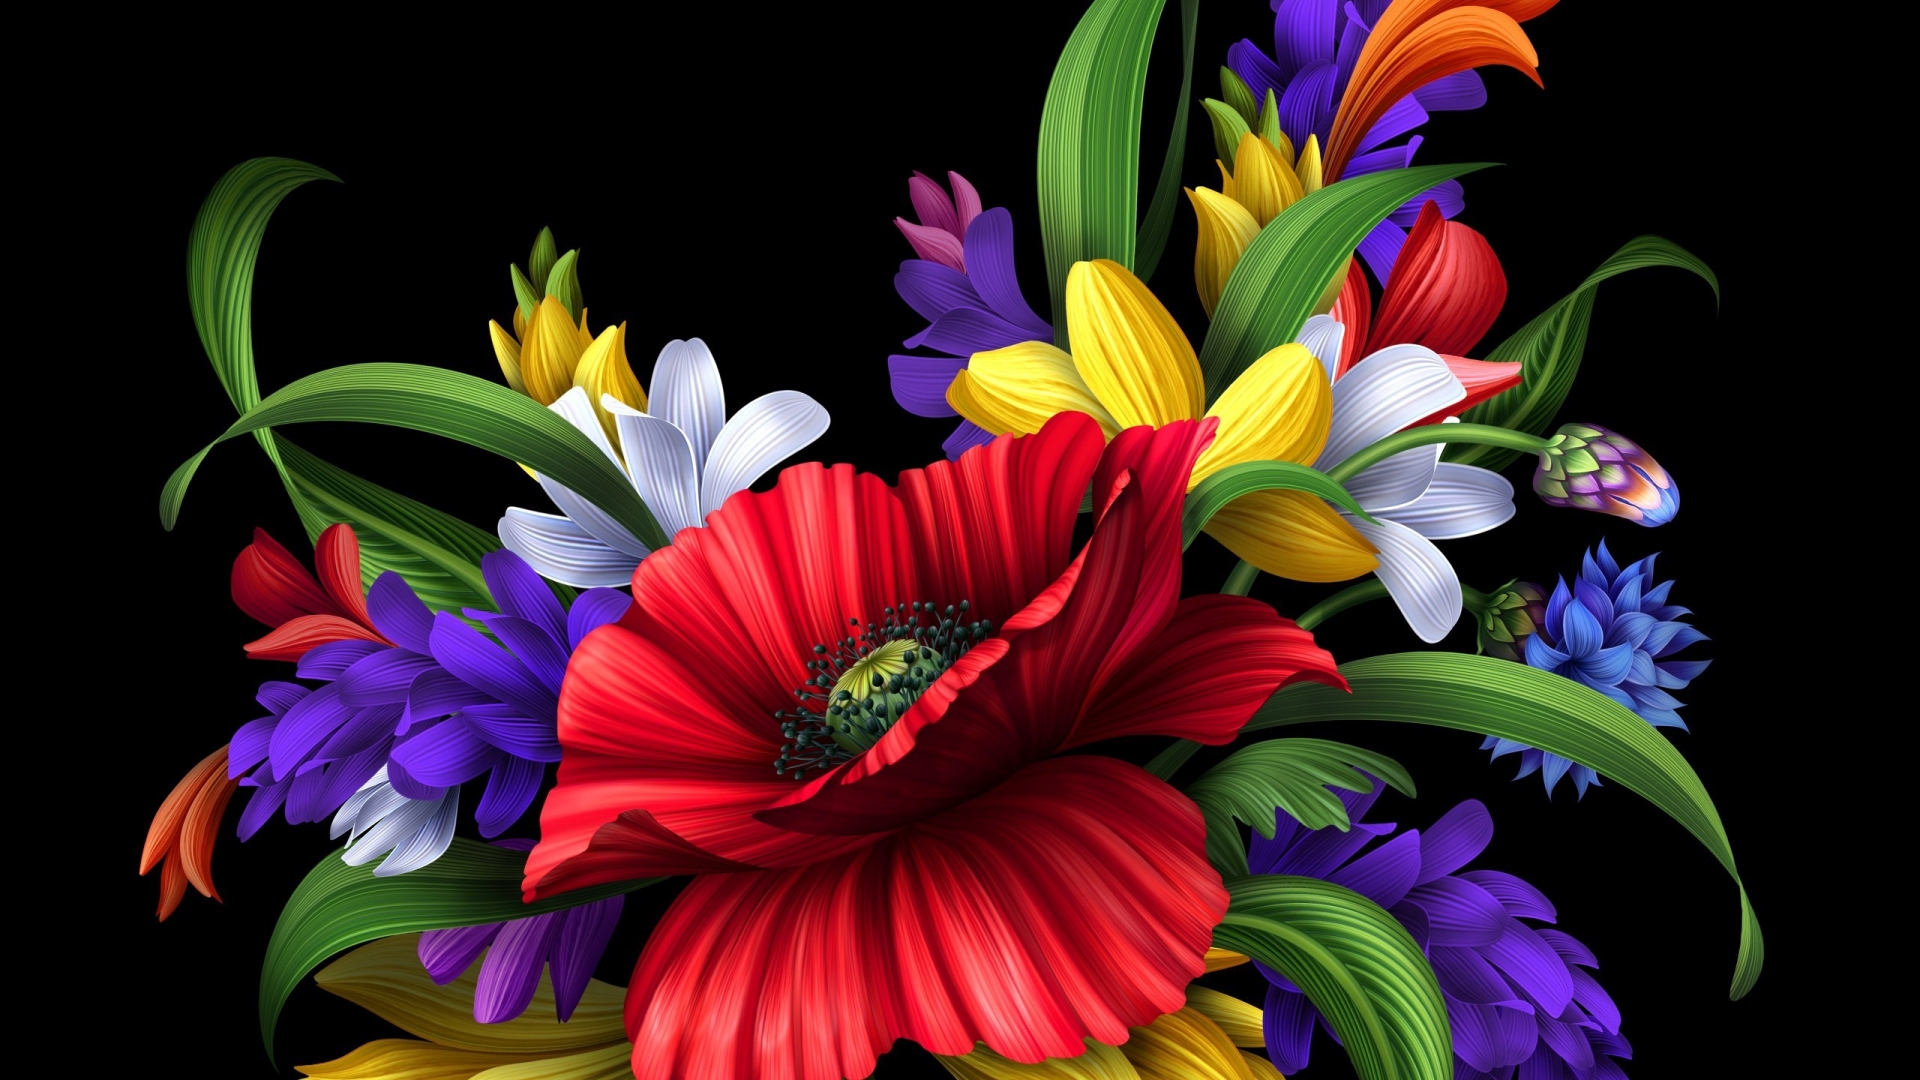 Special Flower Bouquet for 1920 x 1080 HDTV 1080p resolution